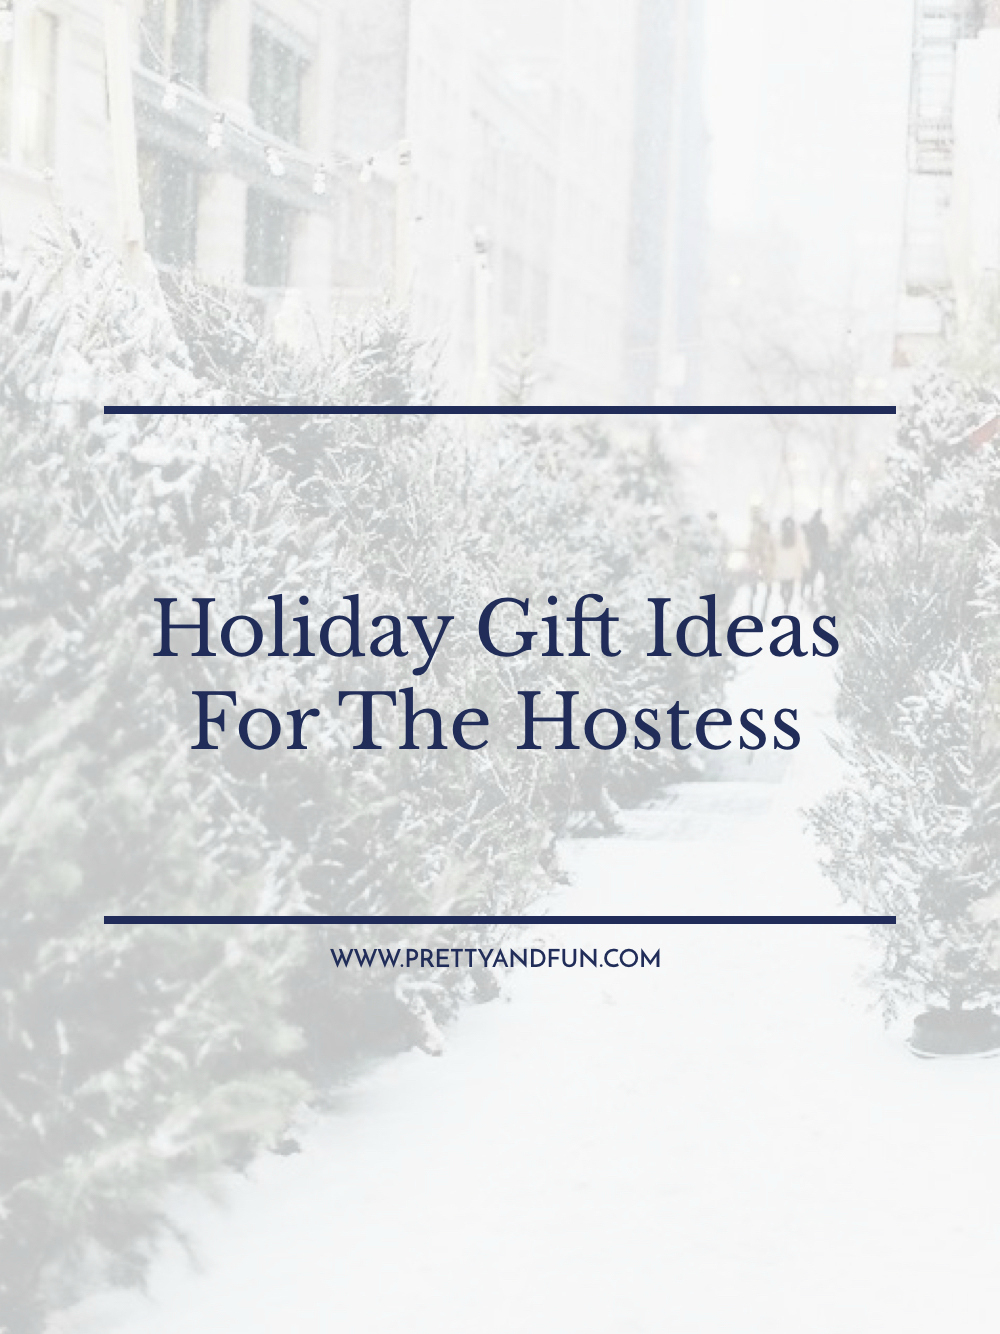 Holiday Gift Ideas for the Hostess.